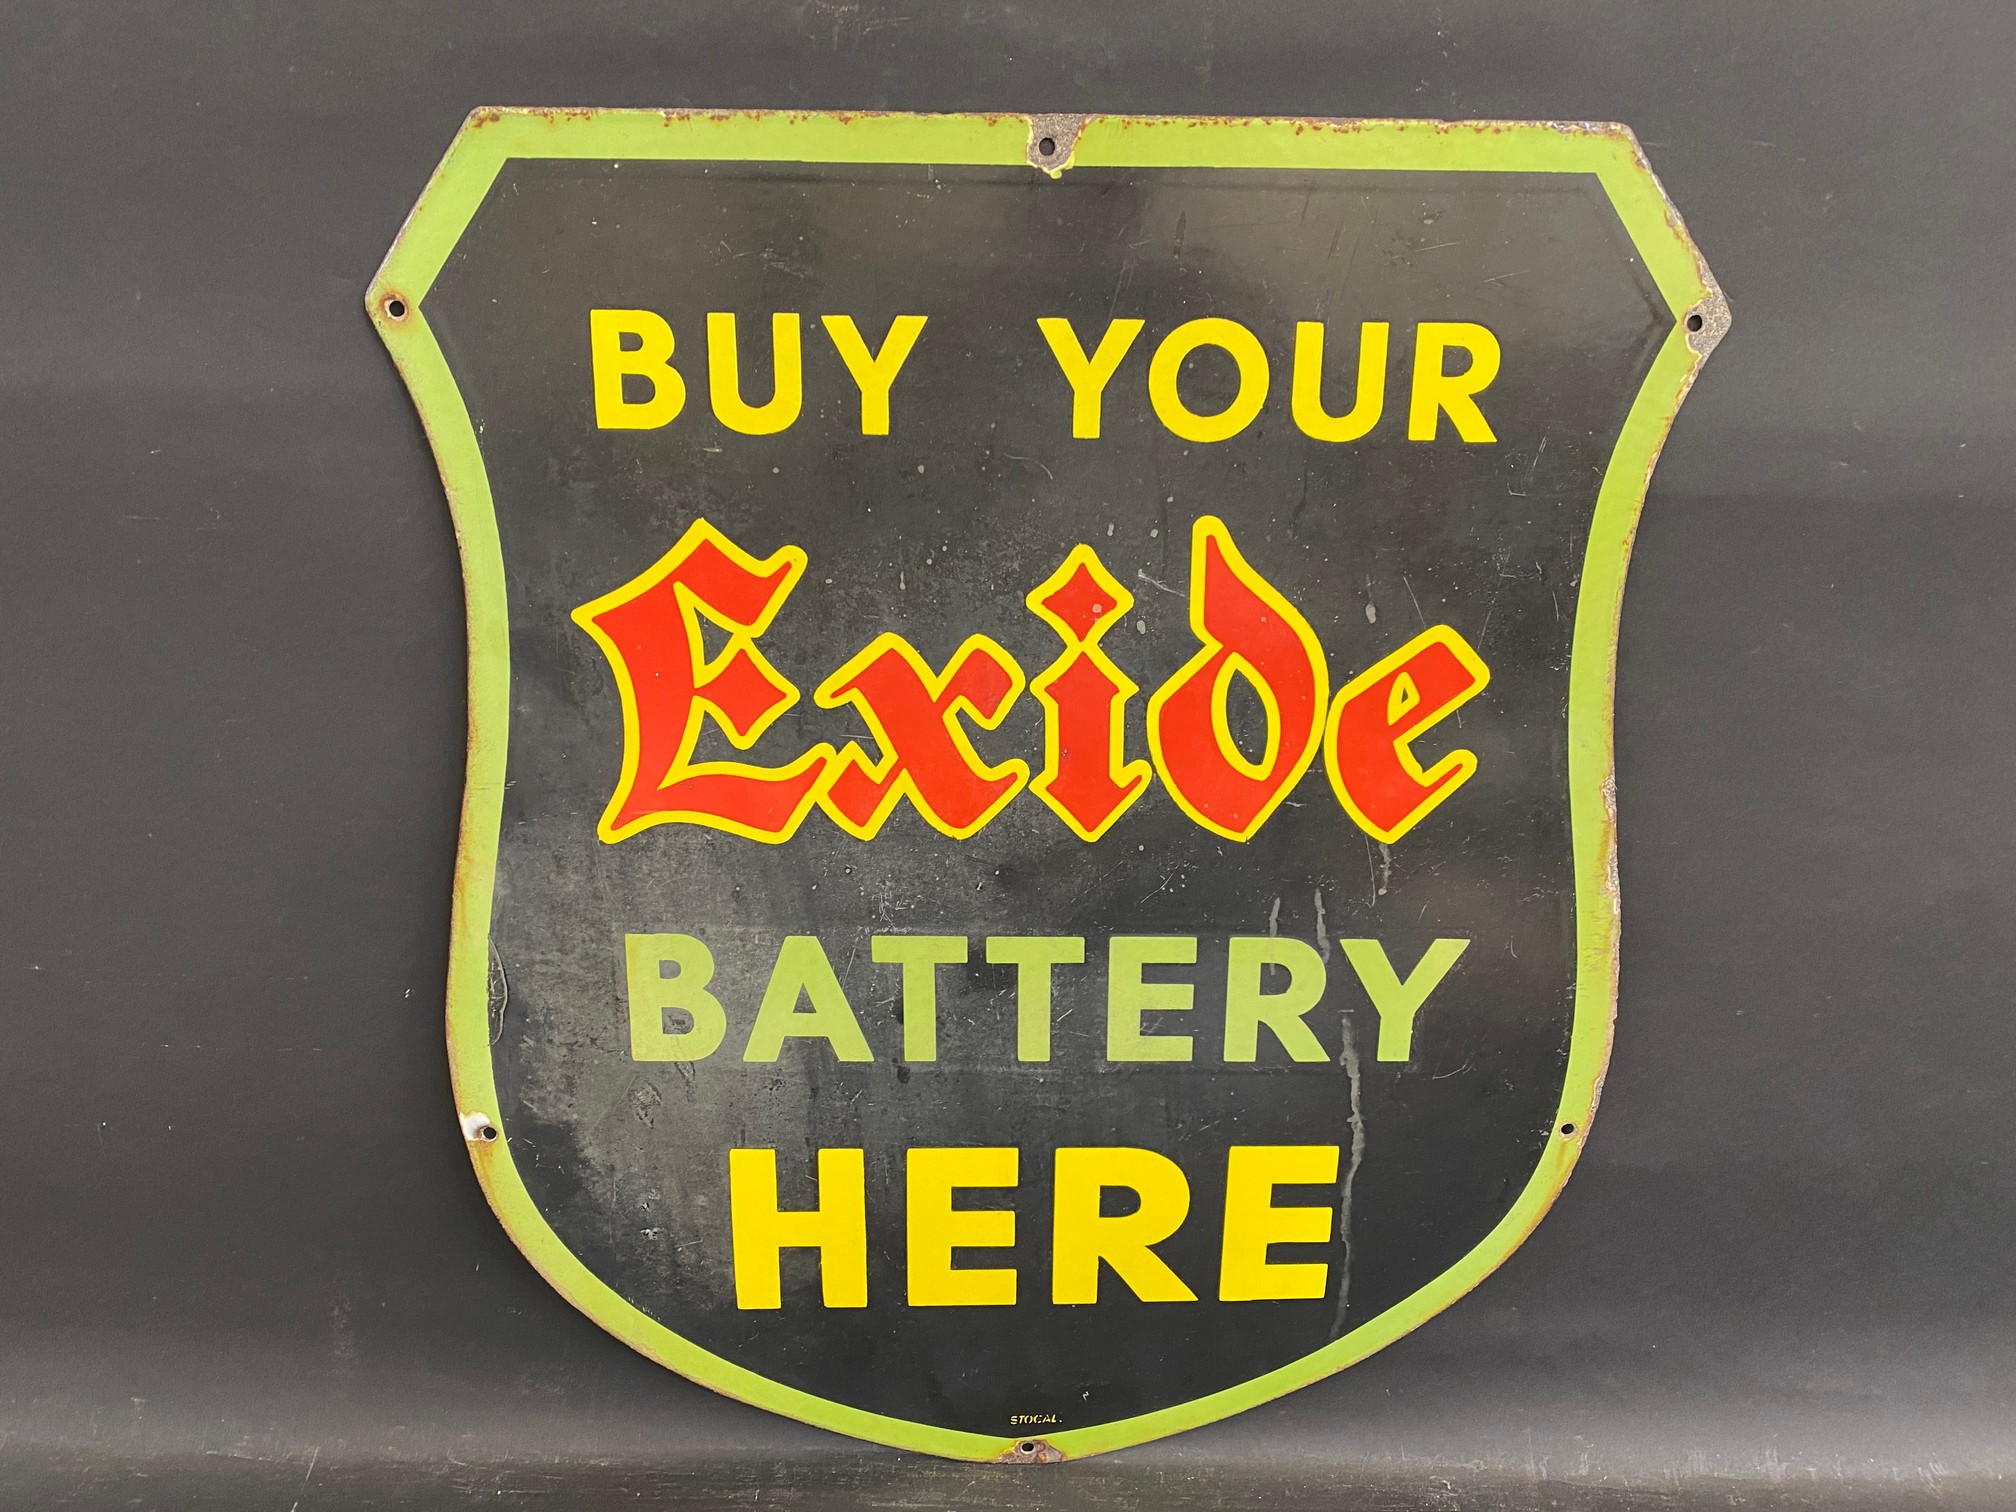 An Exide Battery shield-shaped enamel sign by Stocal, 21 x 24".